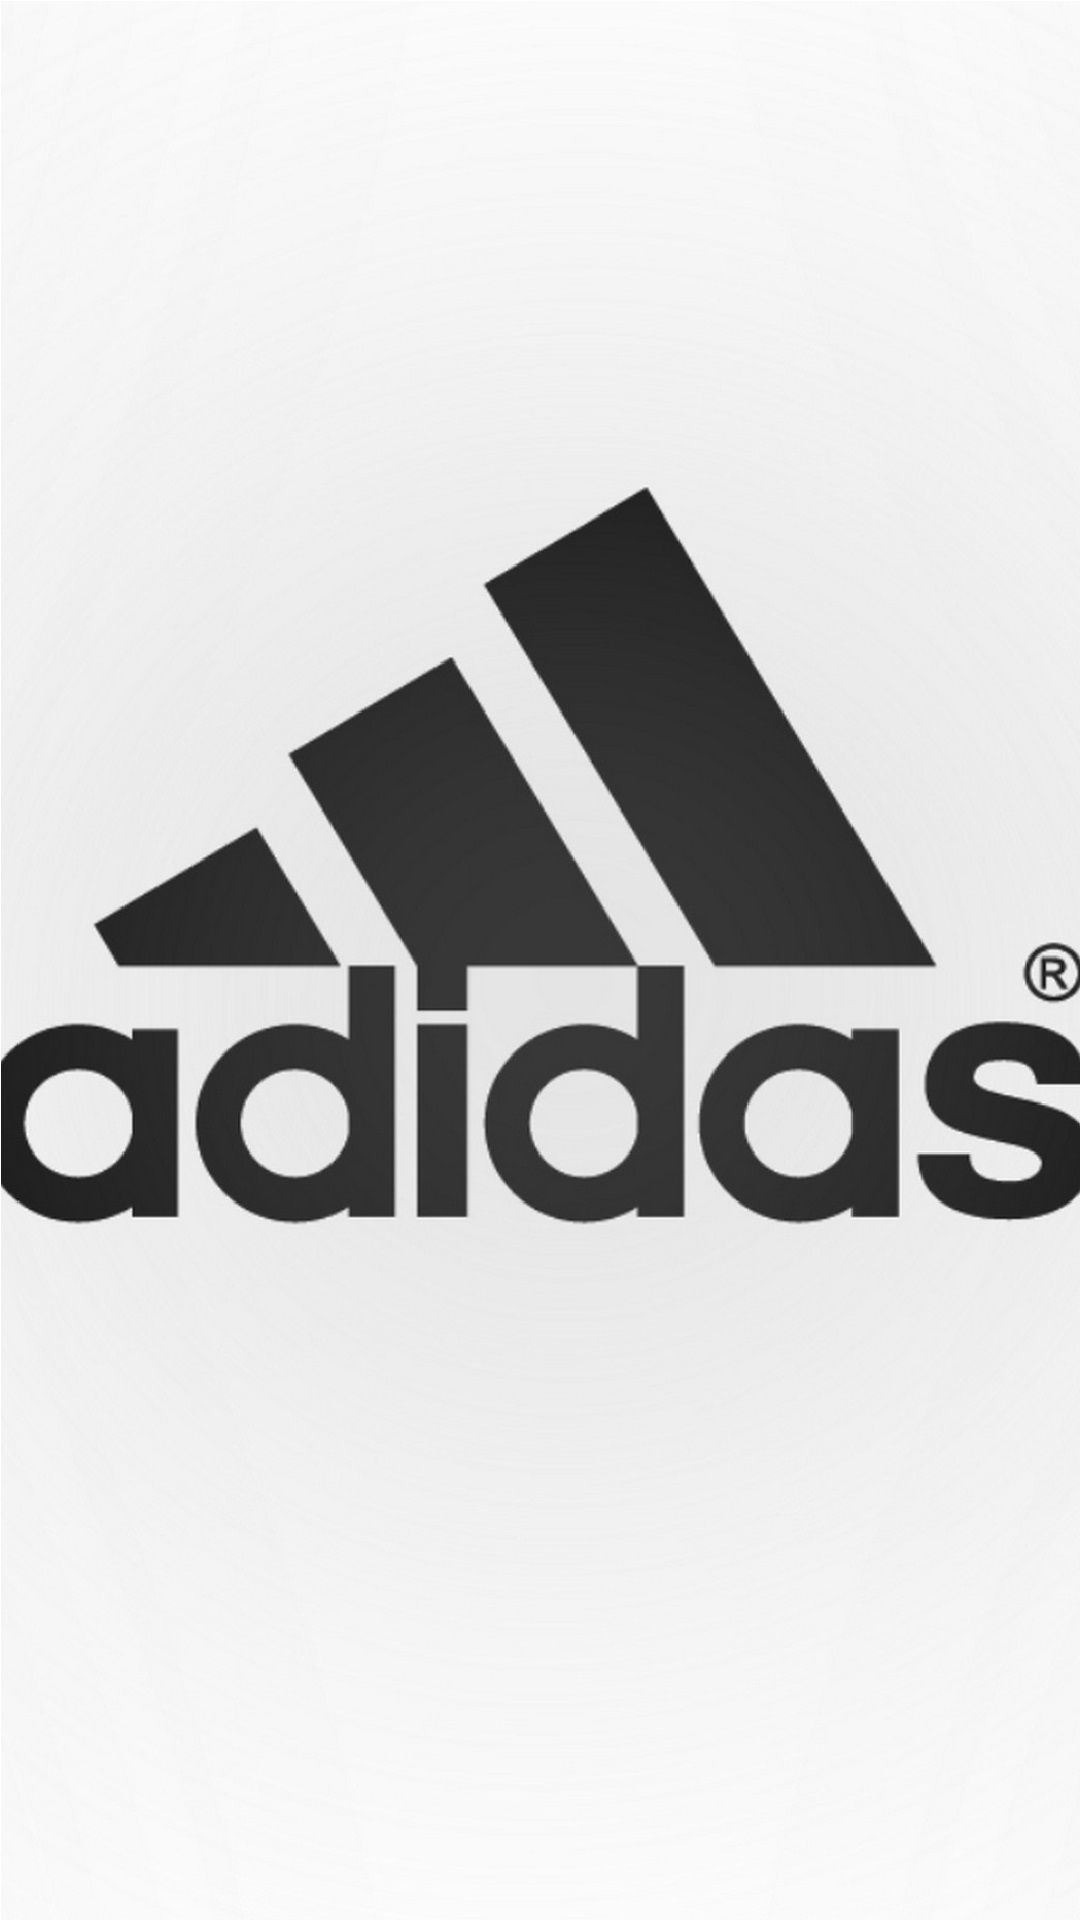 Adidas Logo Wallpapers For Phone HD